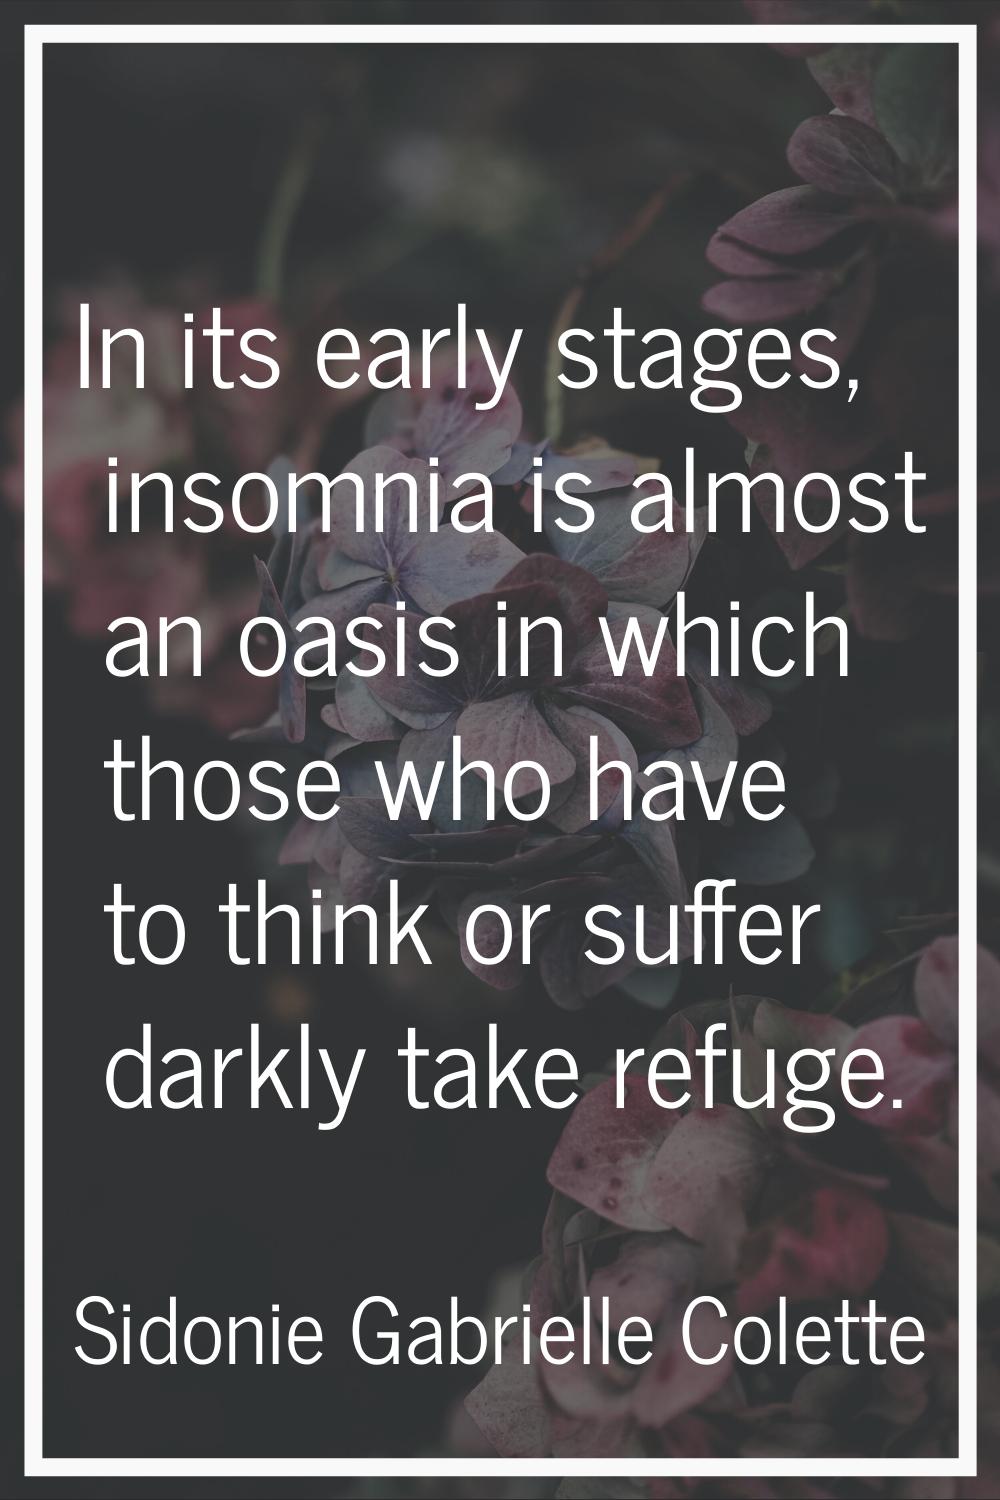 In its early stages, insomnia is almost an oasis in which those who have to think or suffer darkly 